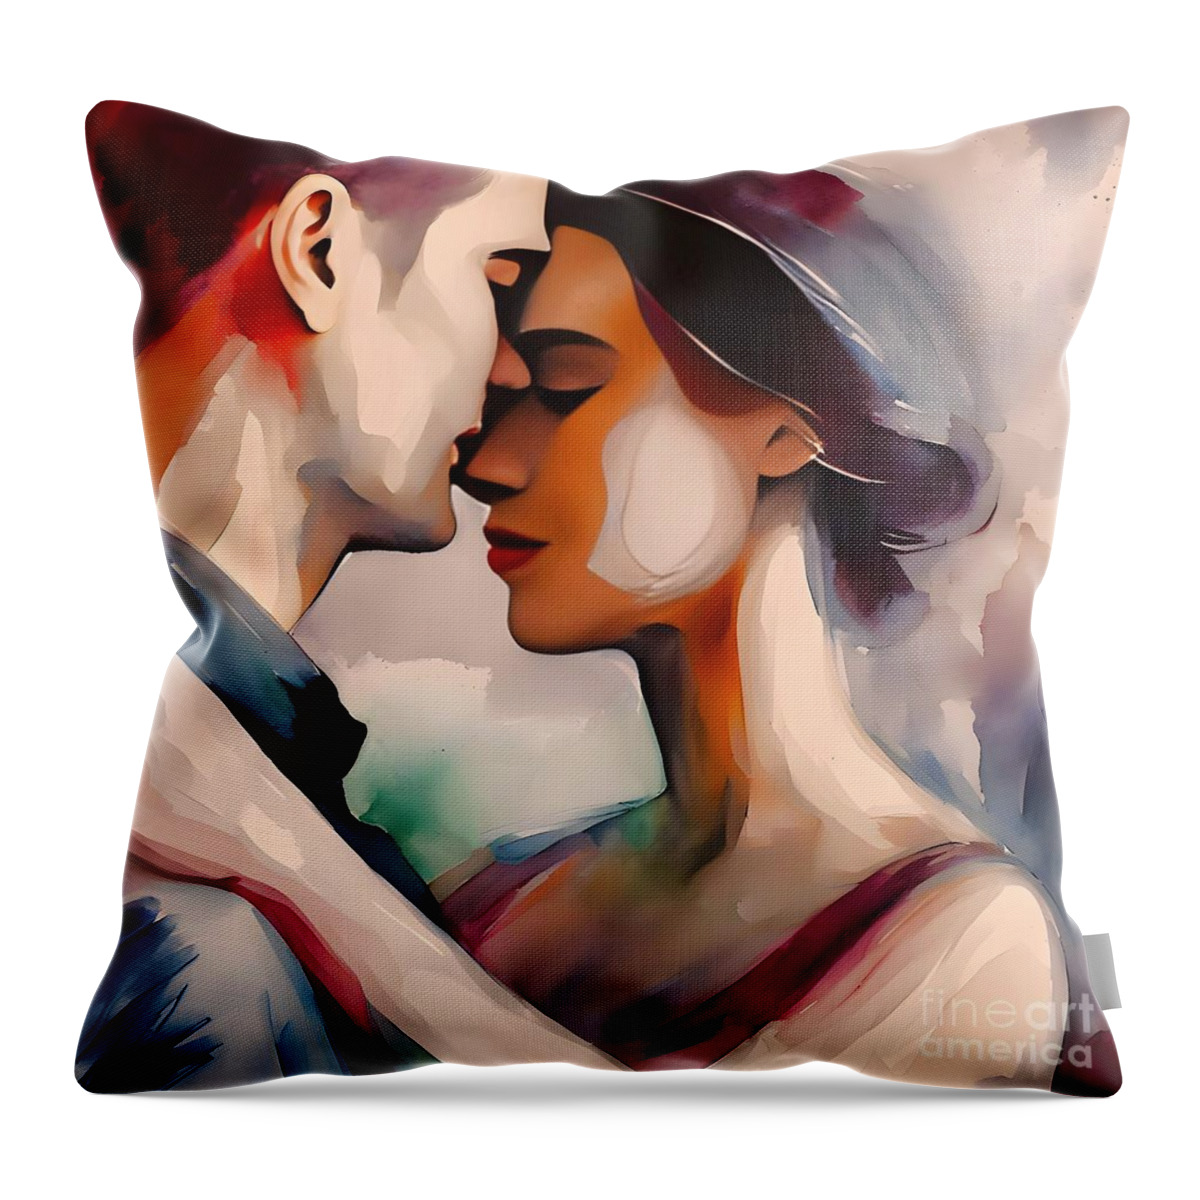 Slow Dance Throw Pillow featuring the digital art Dancing With You by Julie Kaplan